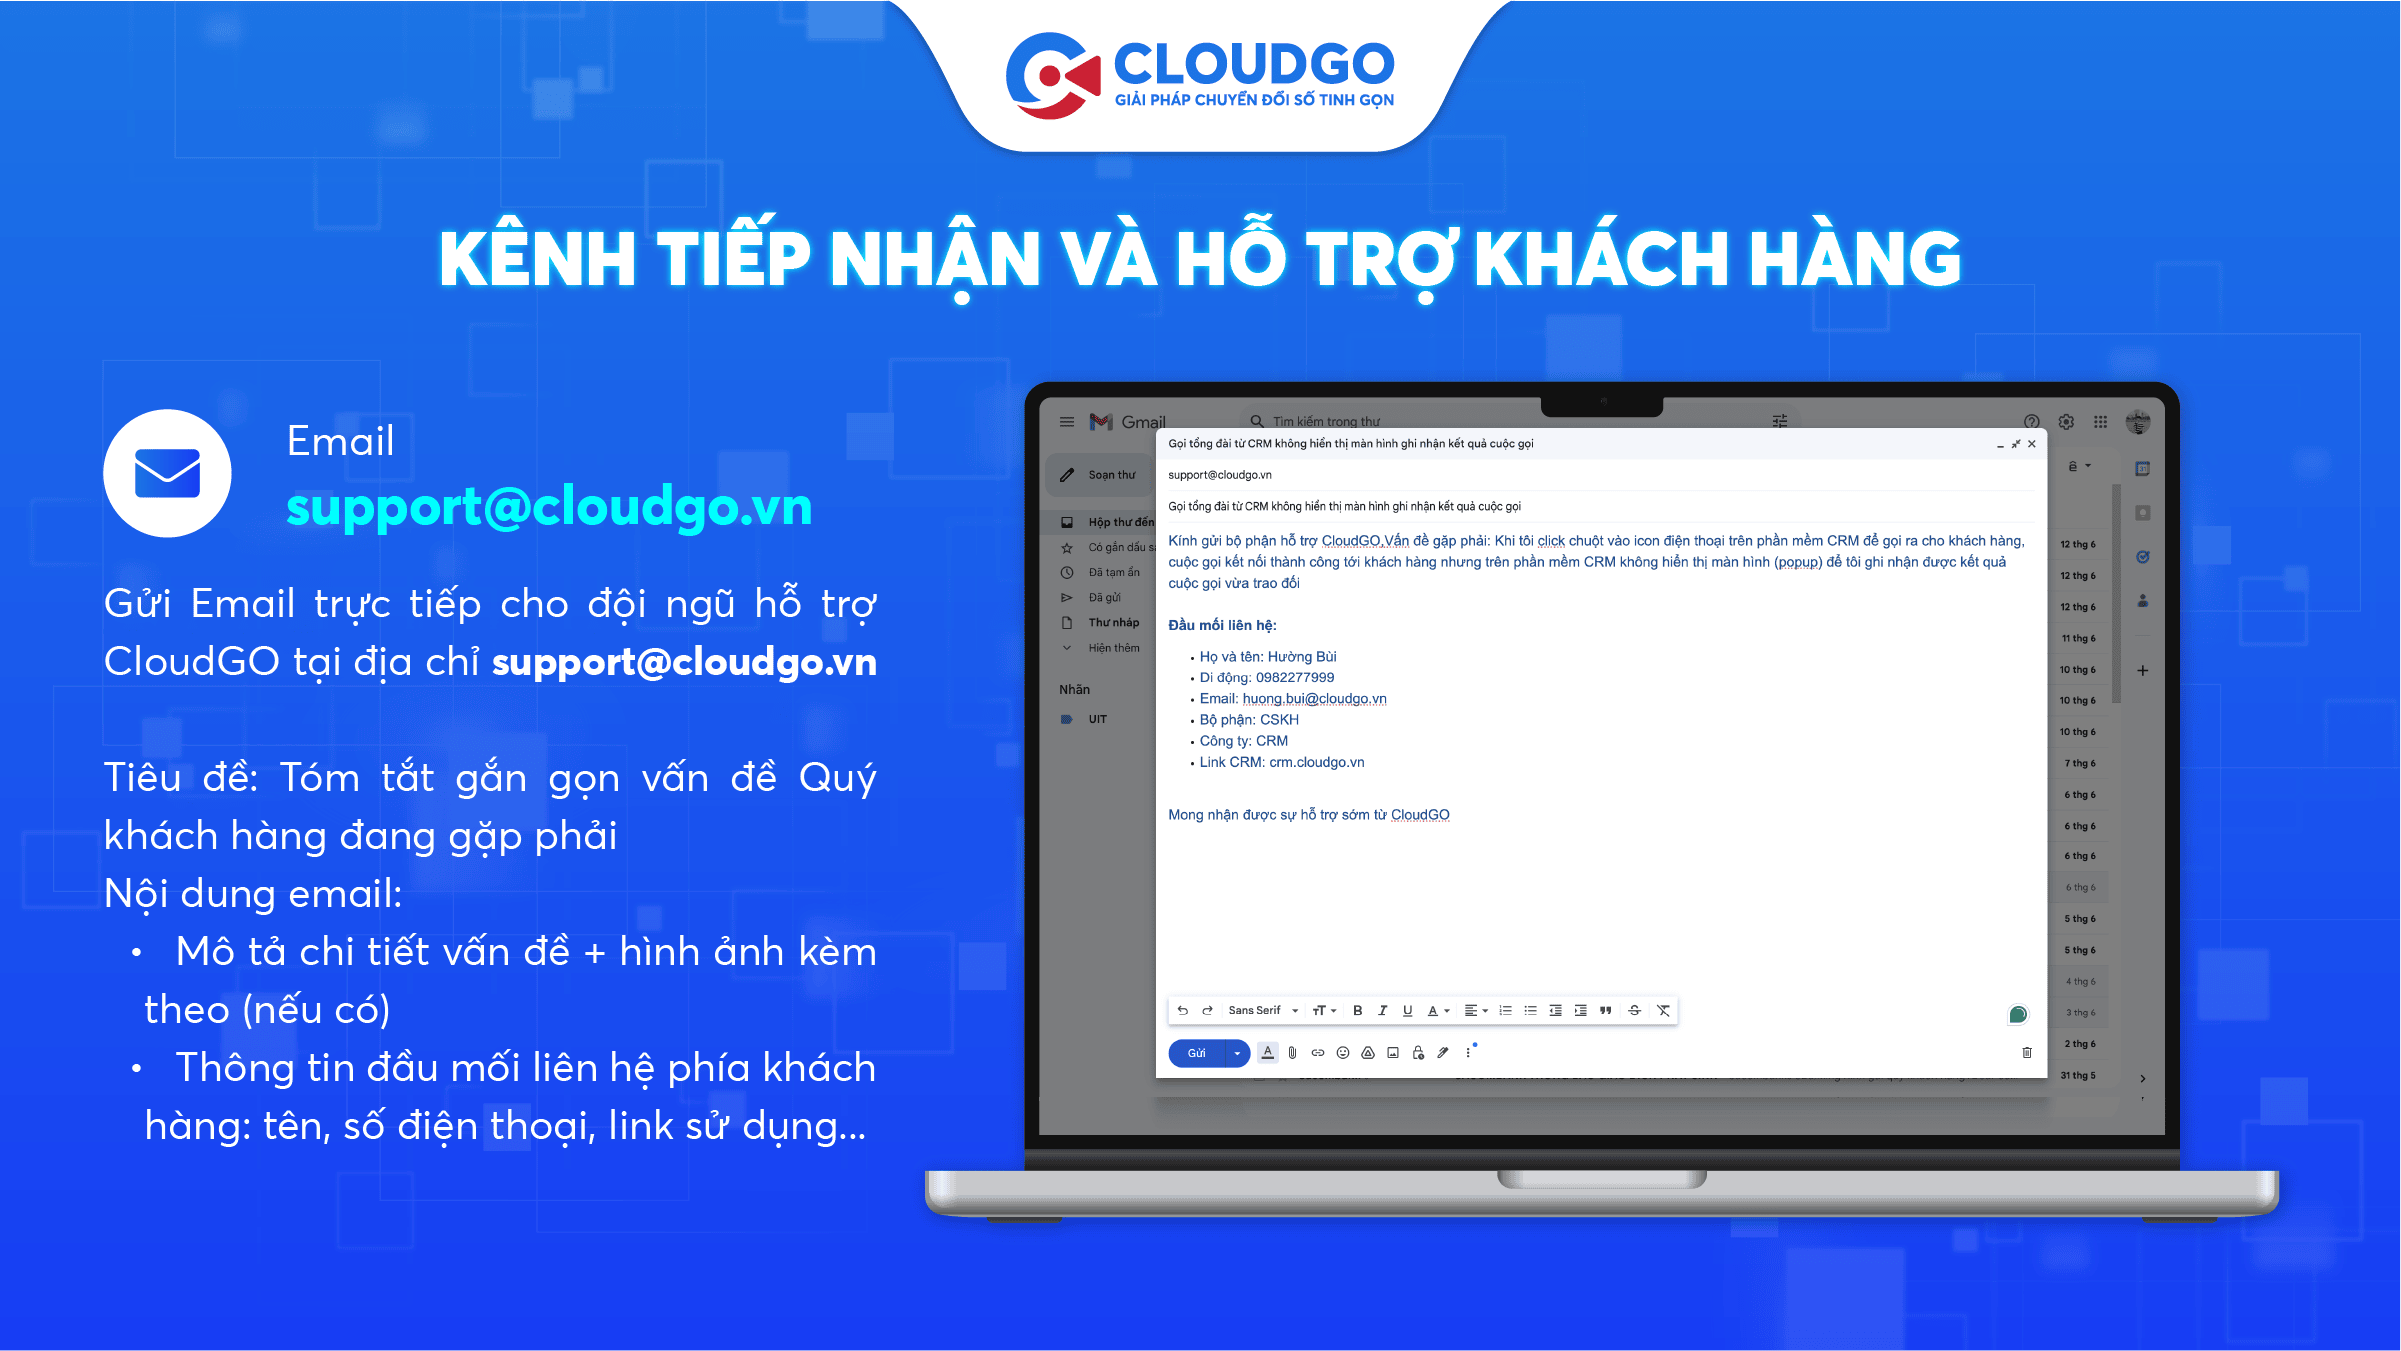 Email support@cloudgo.vn